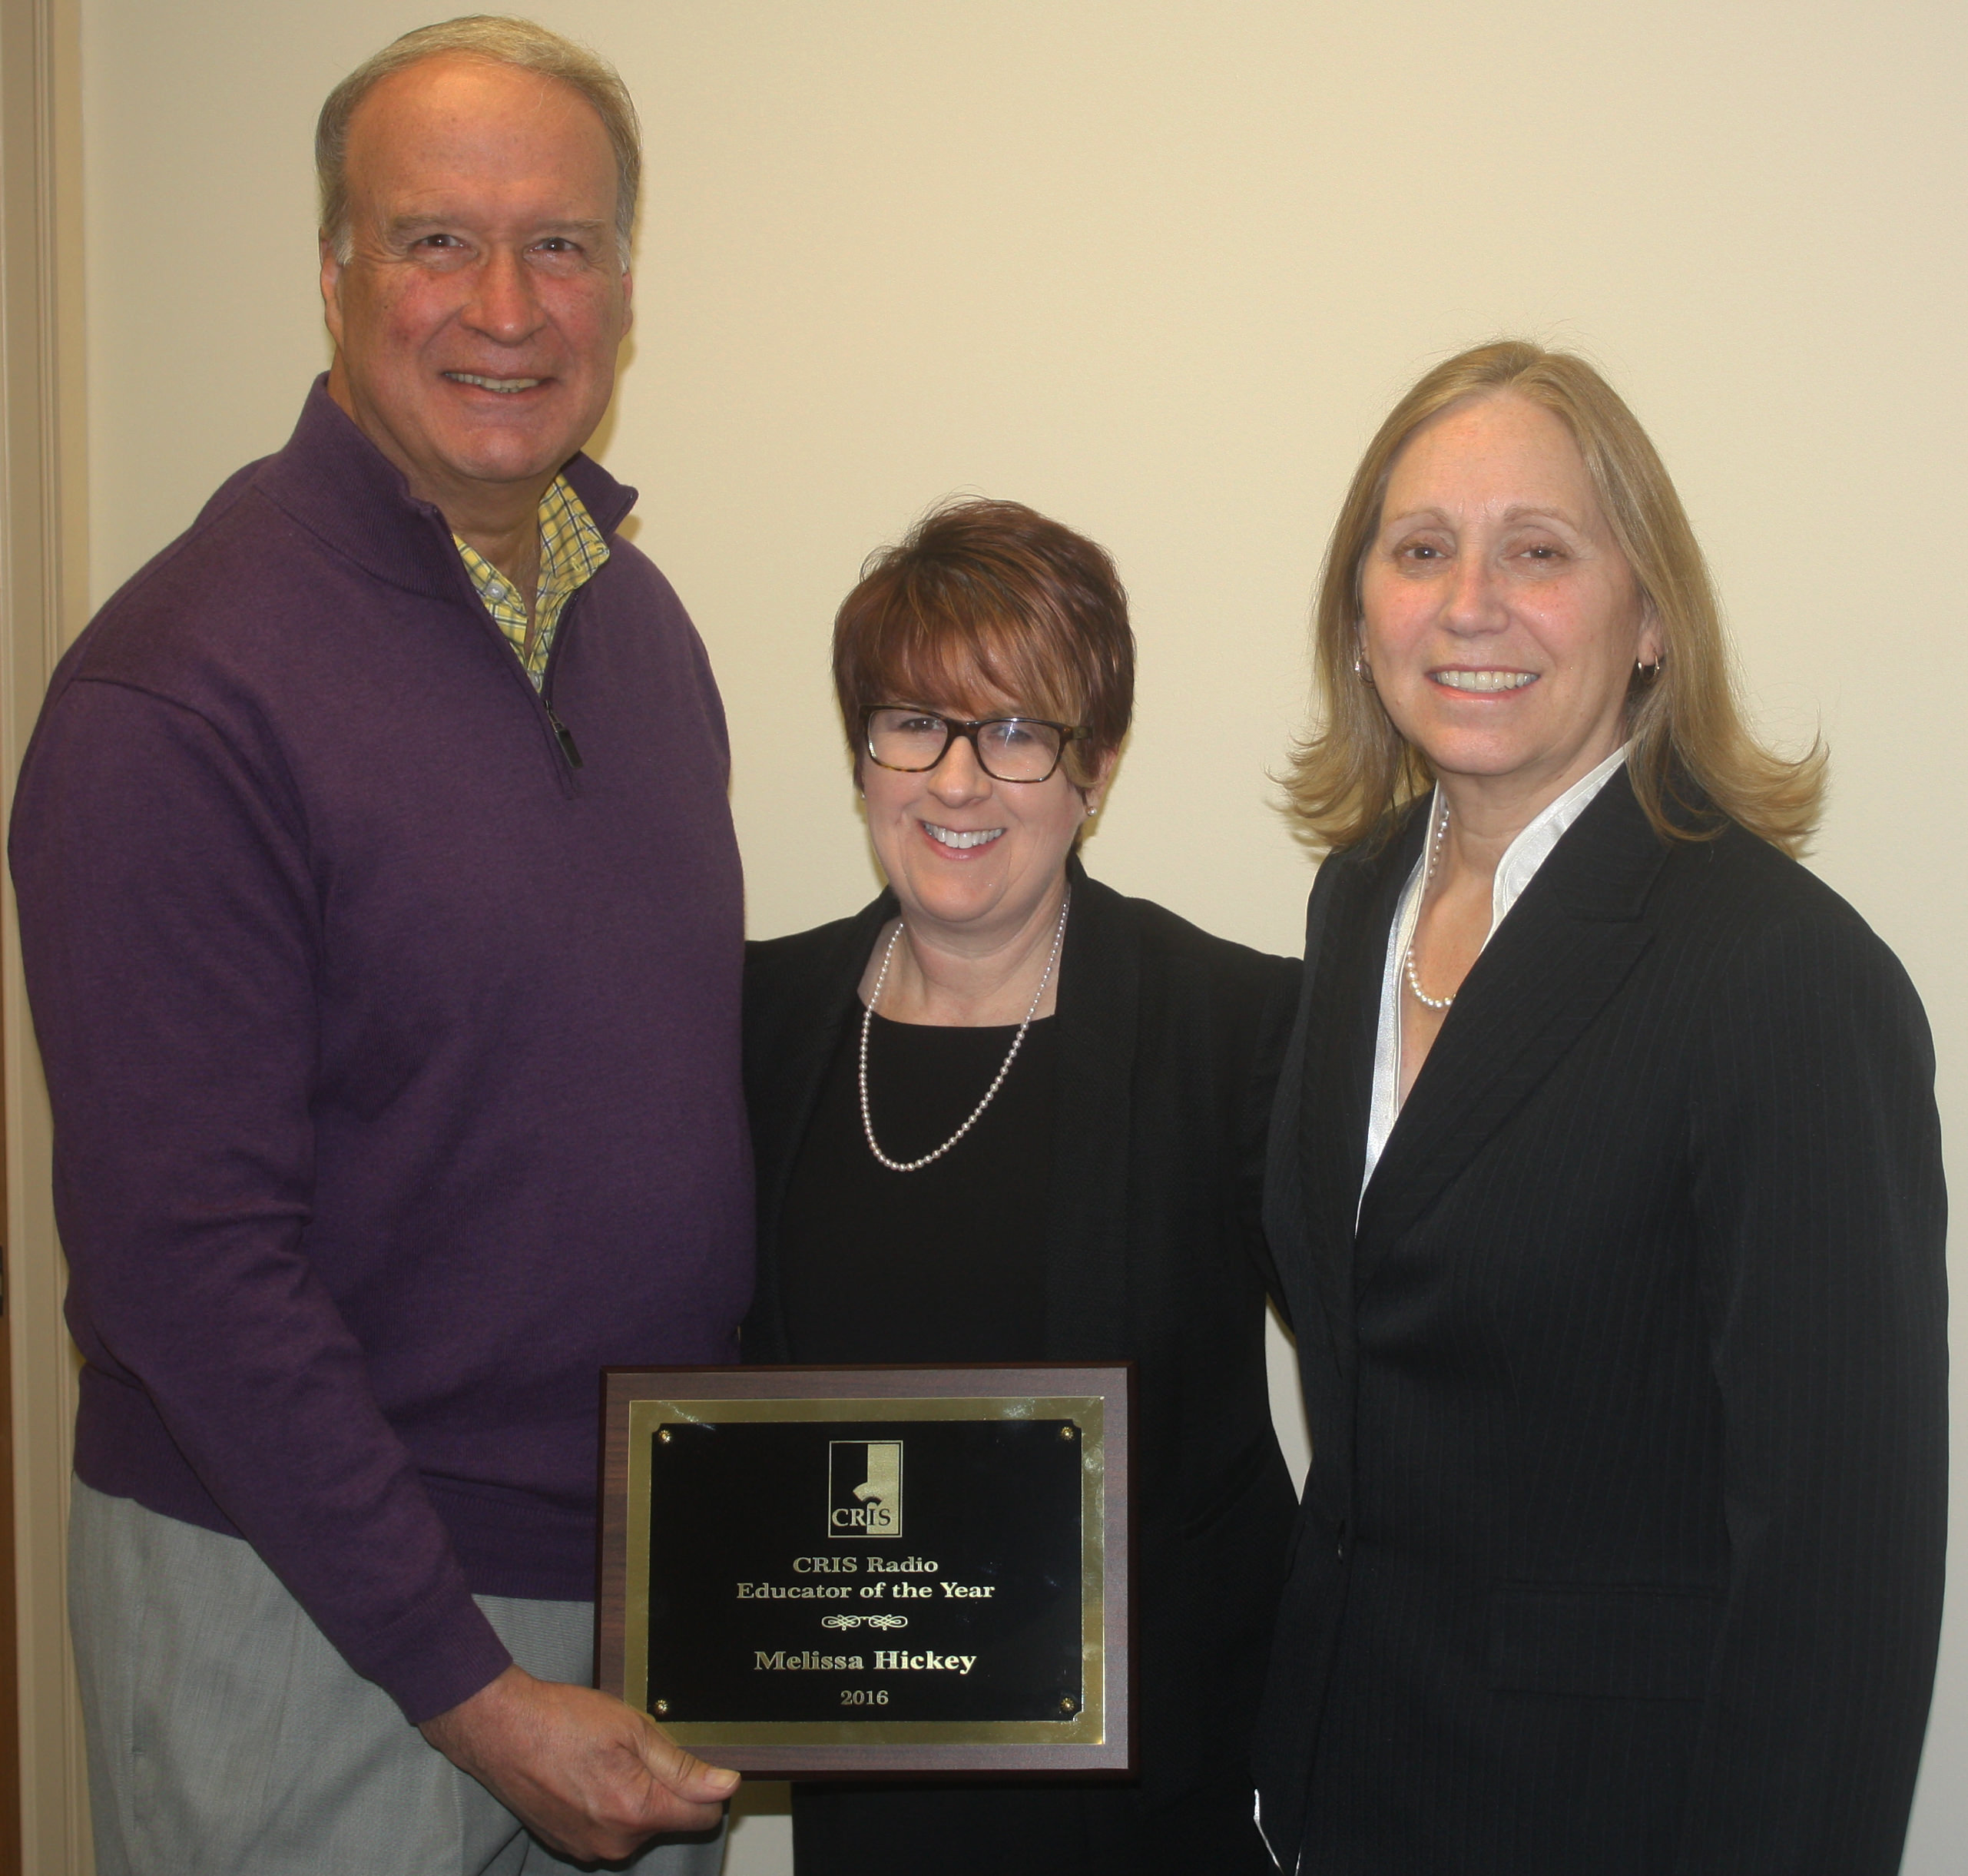 Melissa Hickey, flanked by CRIS Board President Paul Young and Executive Director Diane Weaver Dunne